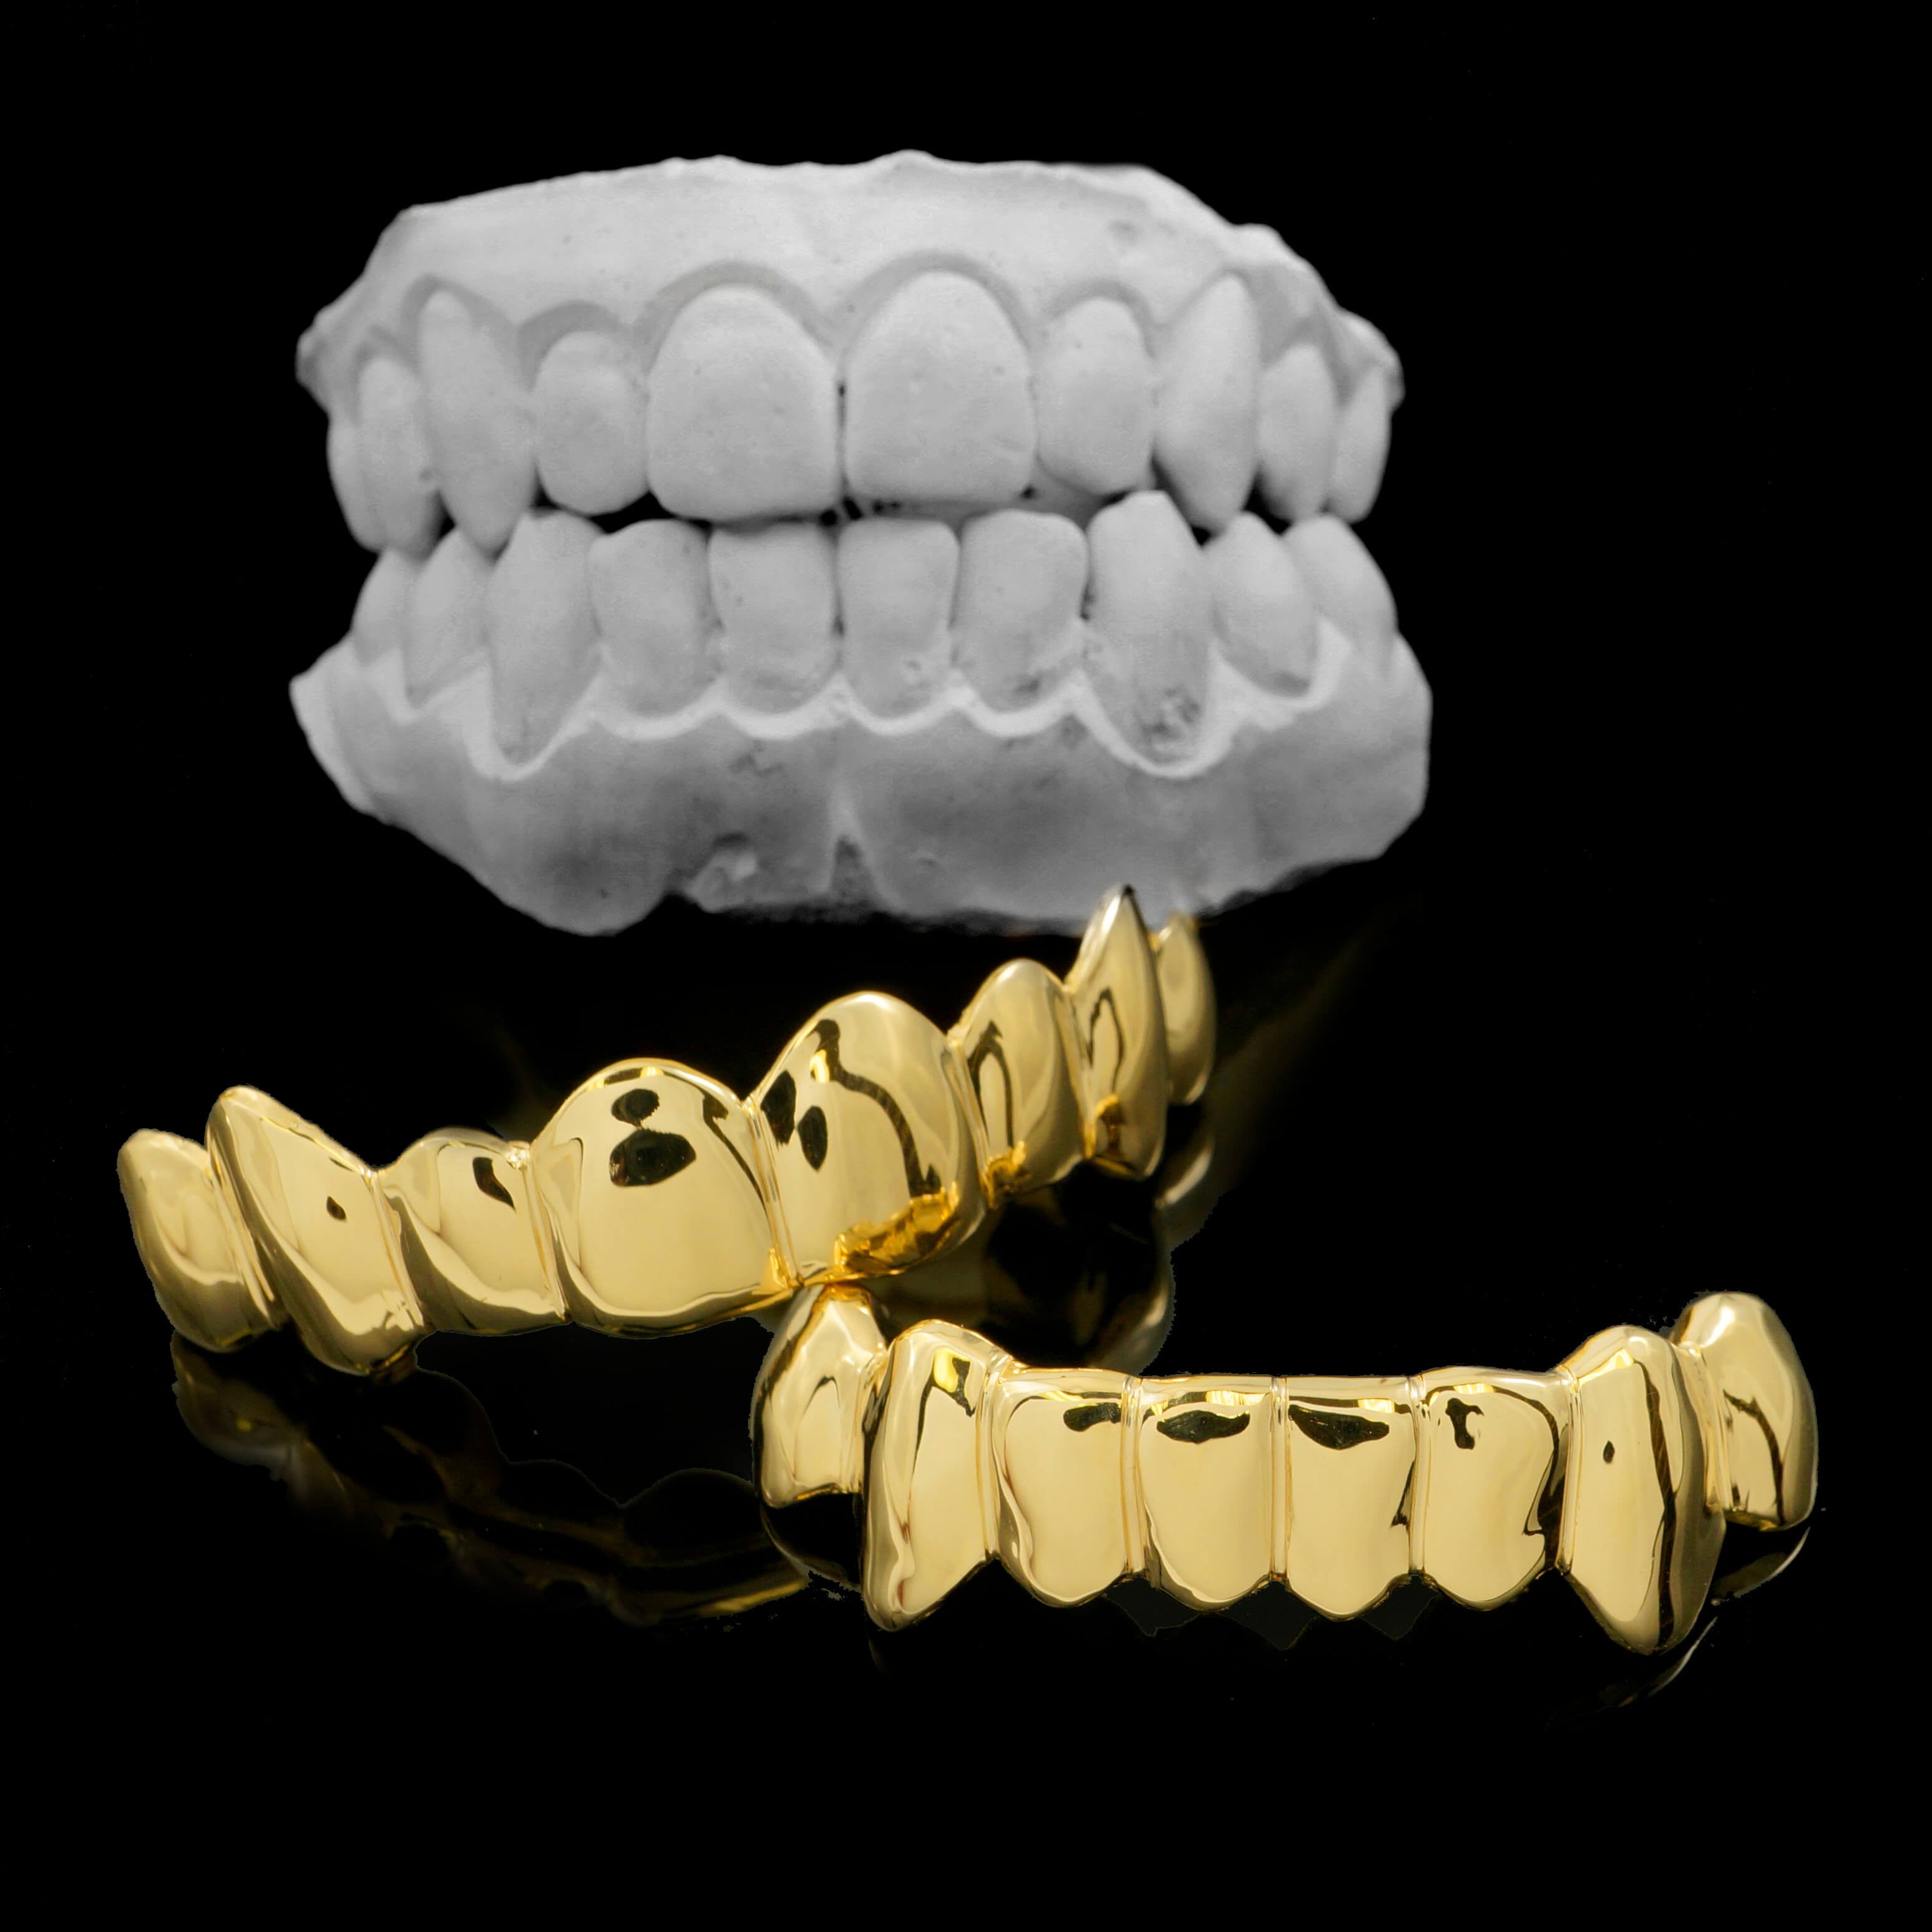 How are Custom Grillz Made?